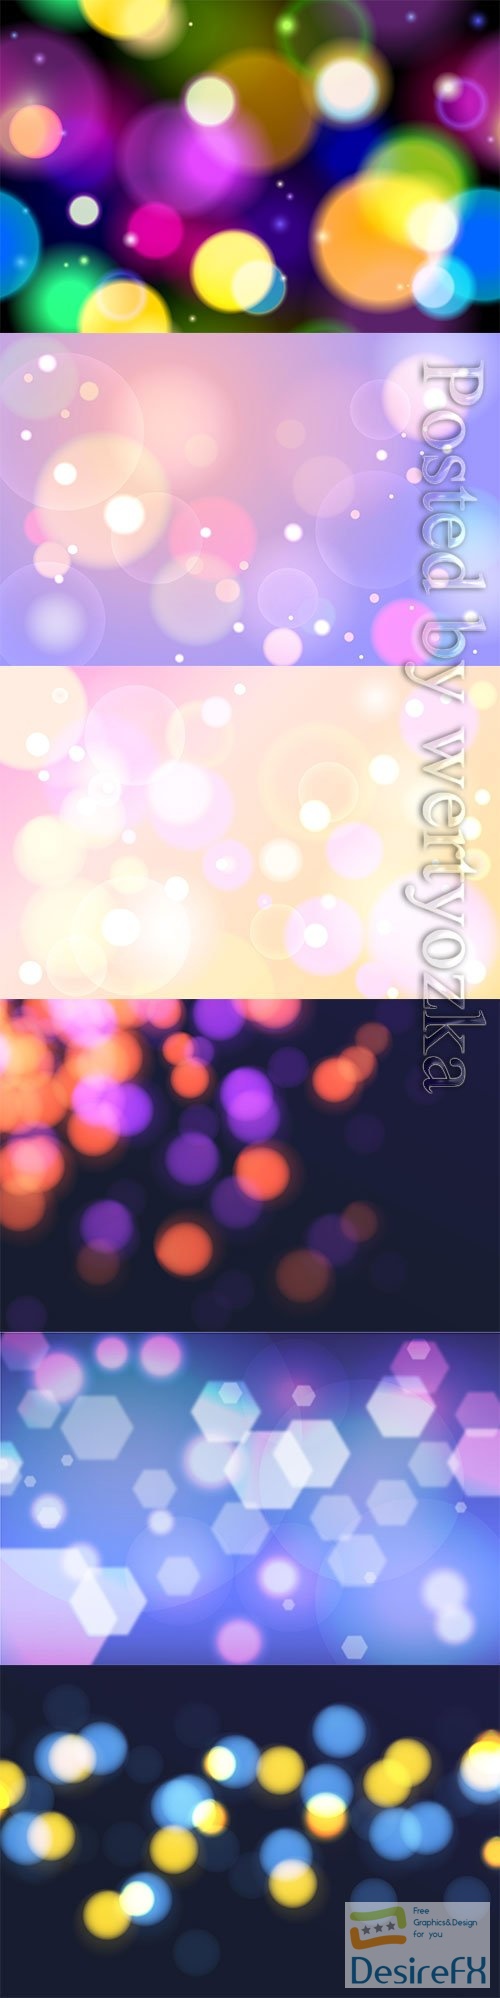 Vector backgrounds with multicolored highlights